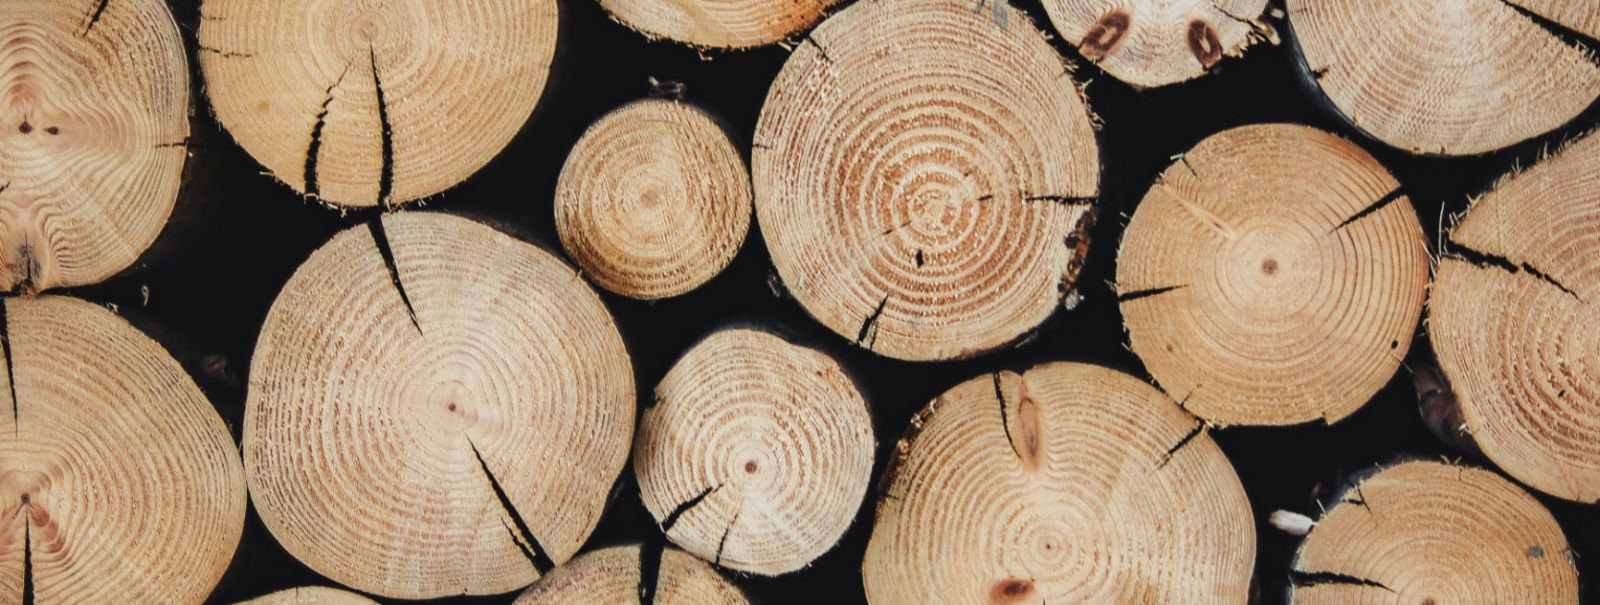 Timber harvesting is a critical component of forest management, balancing the need for wood products with the health of forest ecosystems. Sustainable timber yi